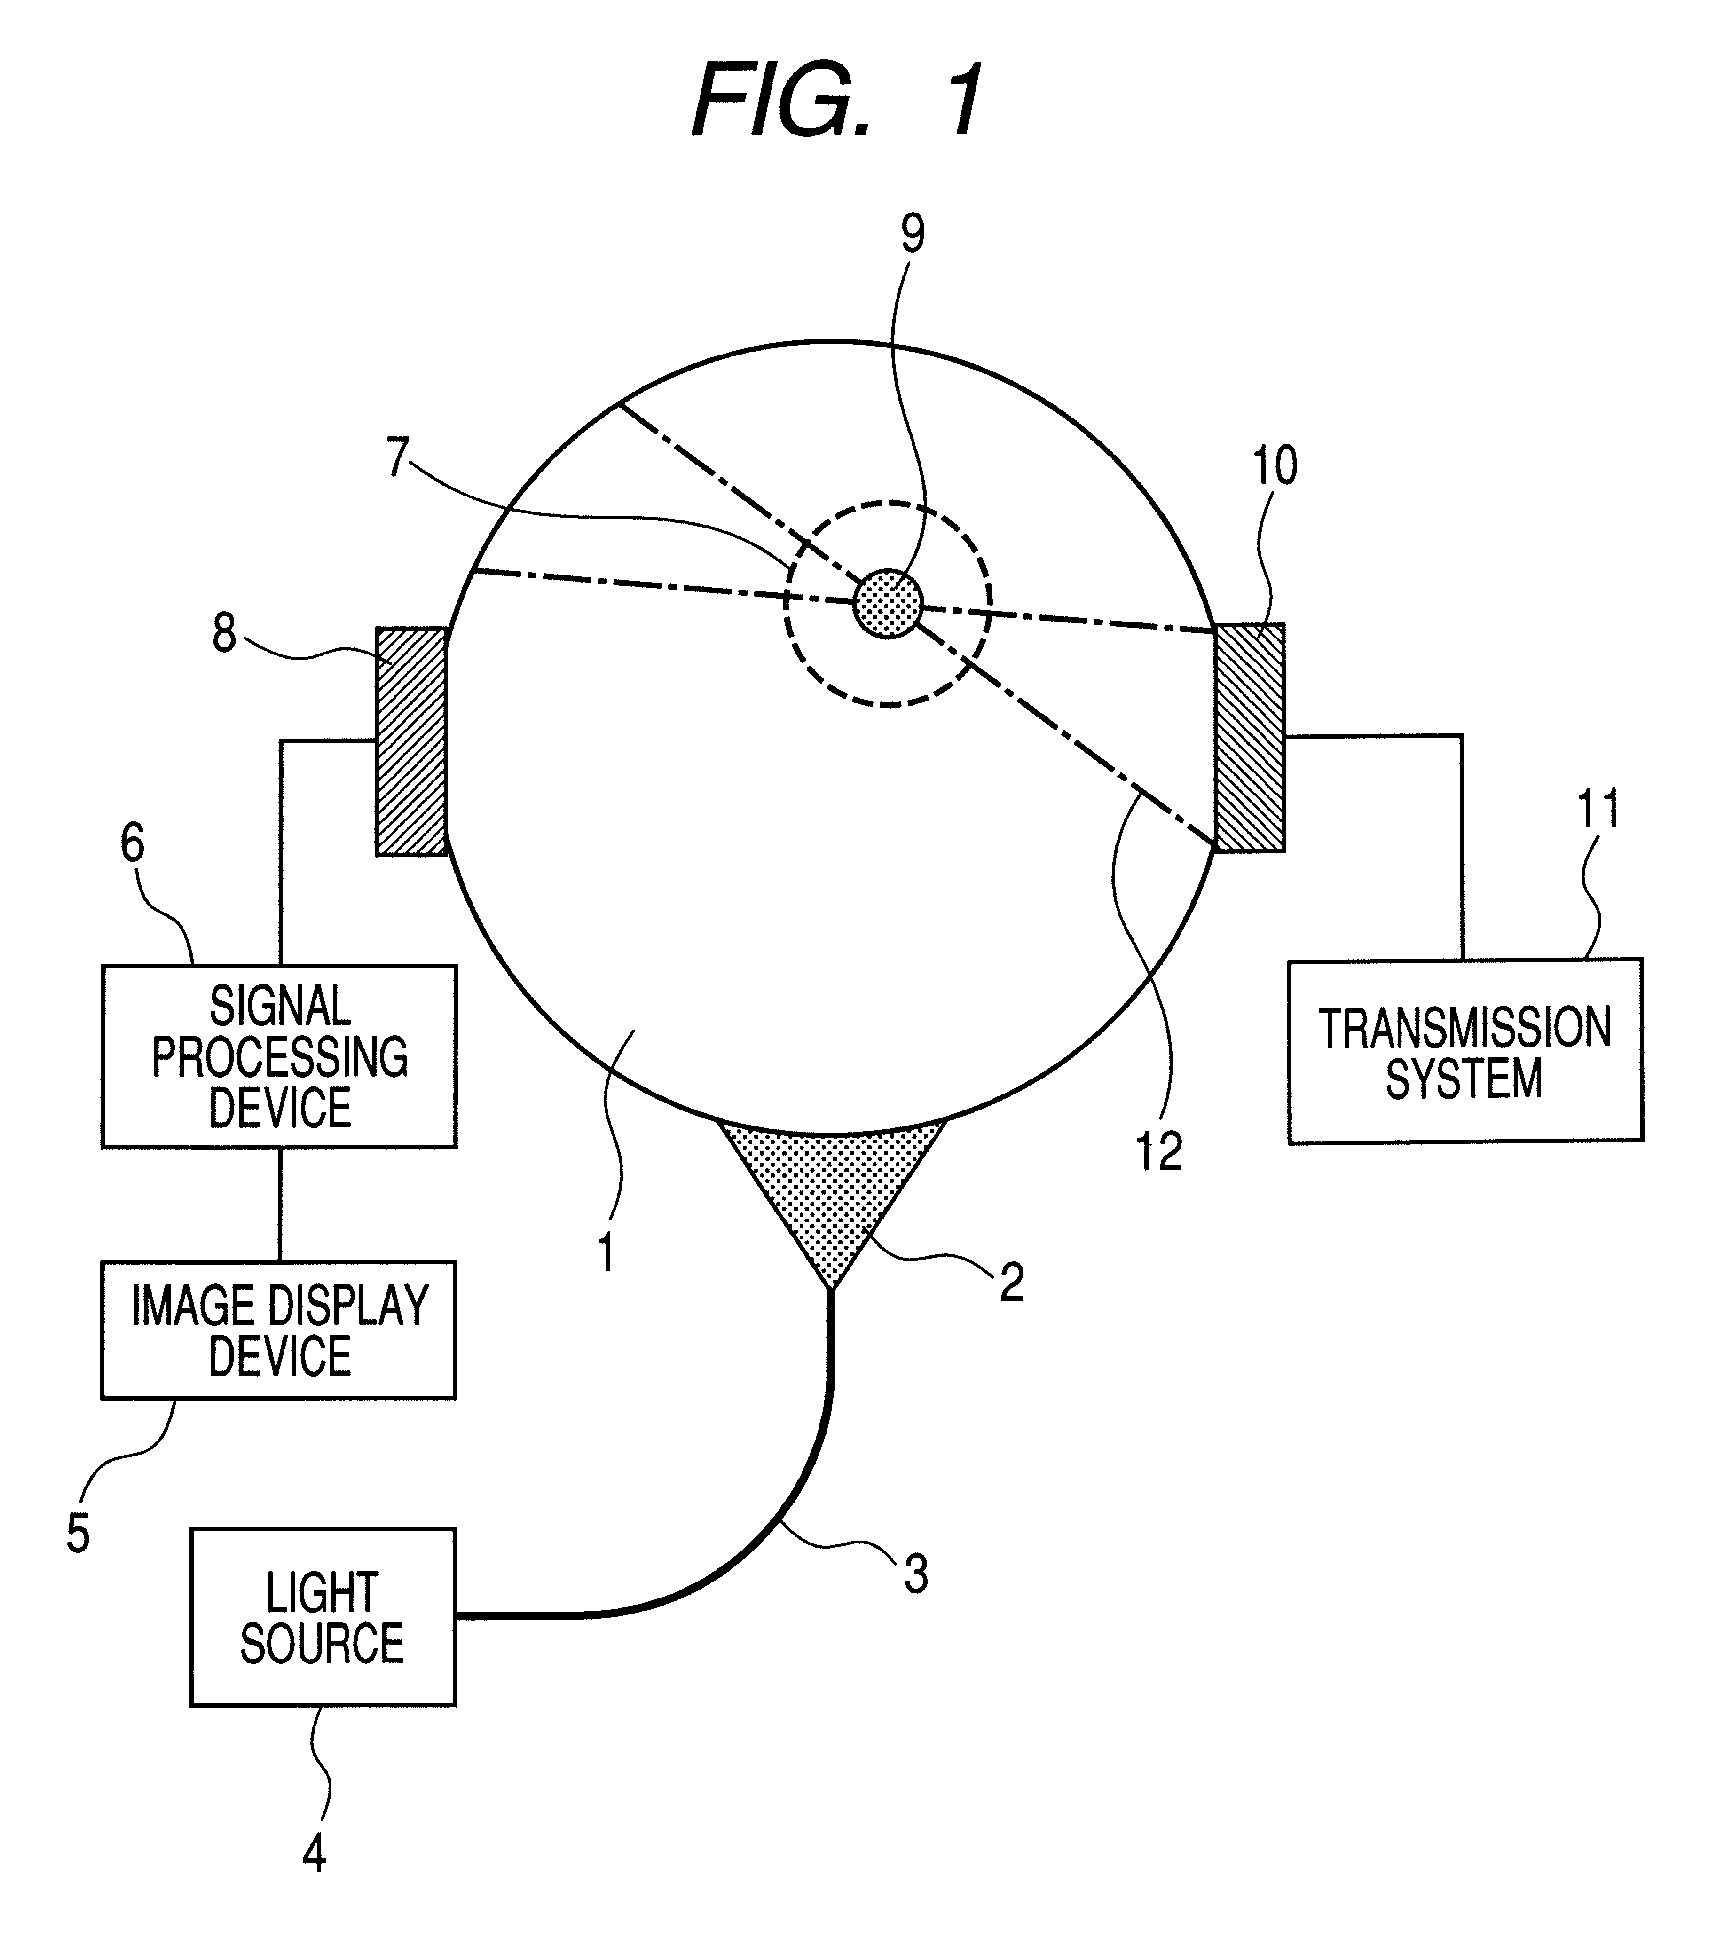 Biological information imaging apparatus and method for analyzing biological information